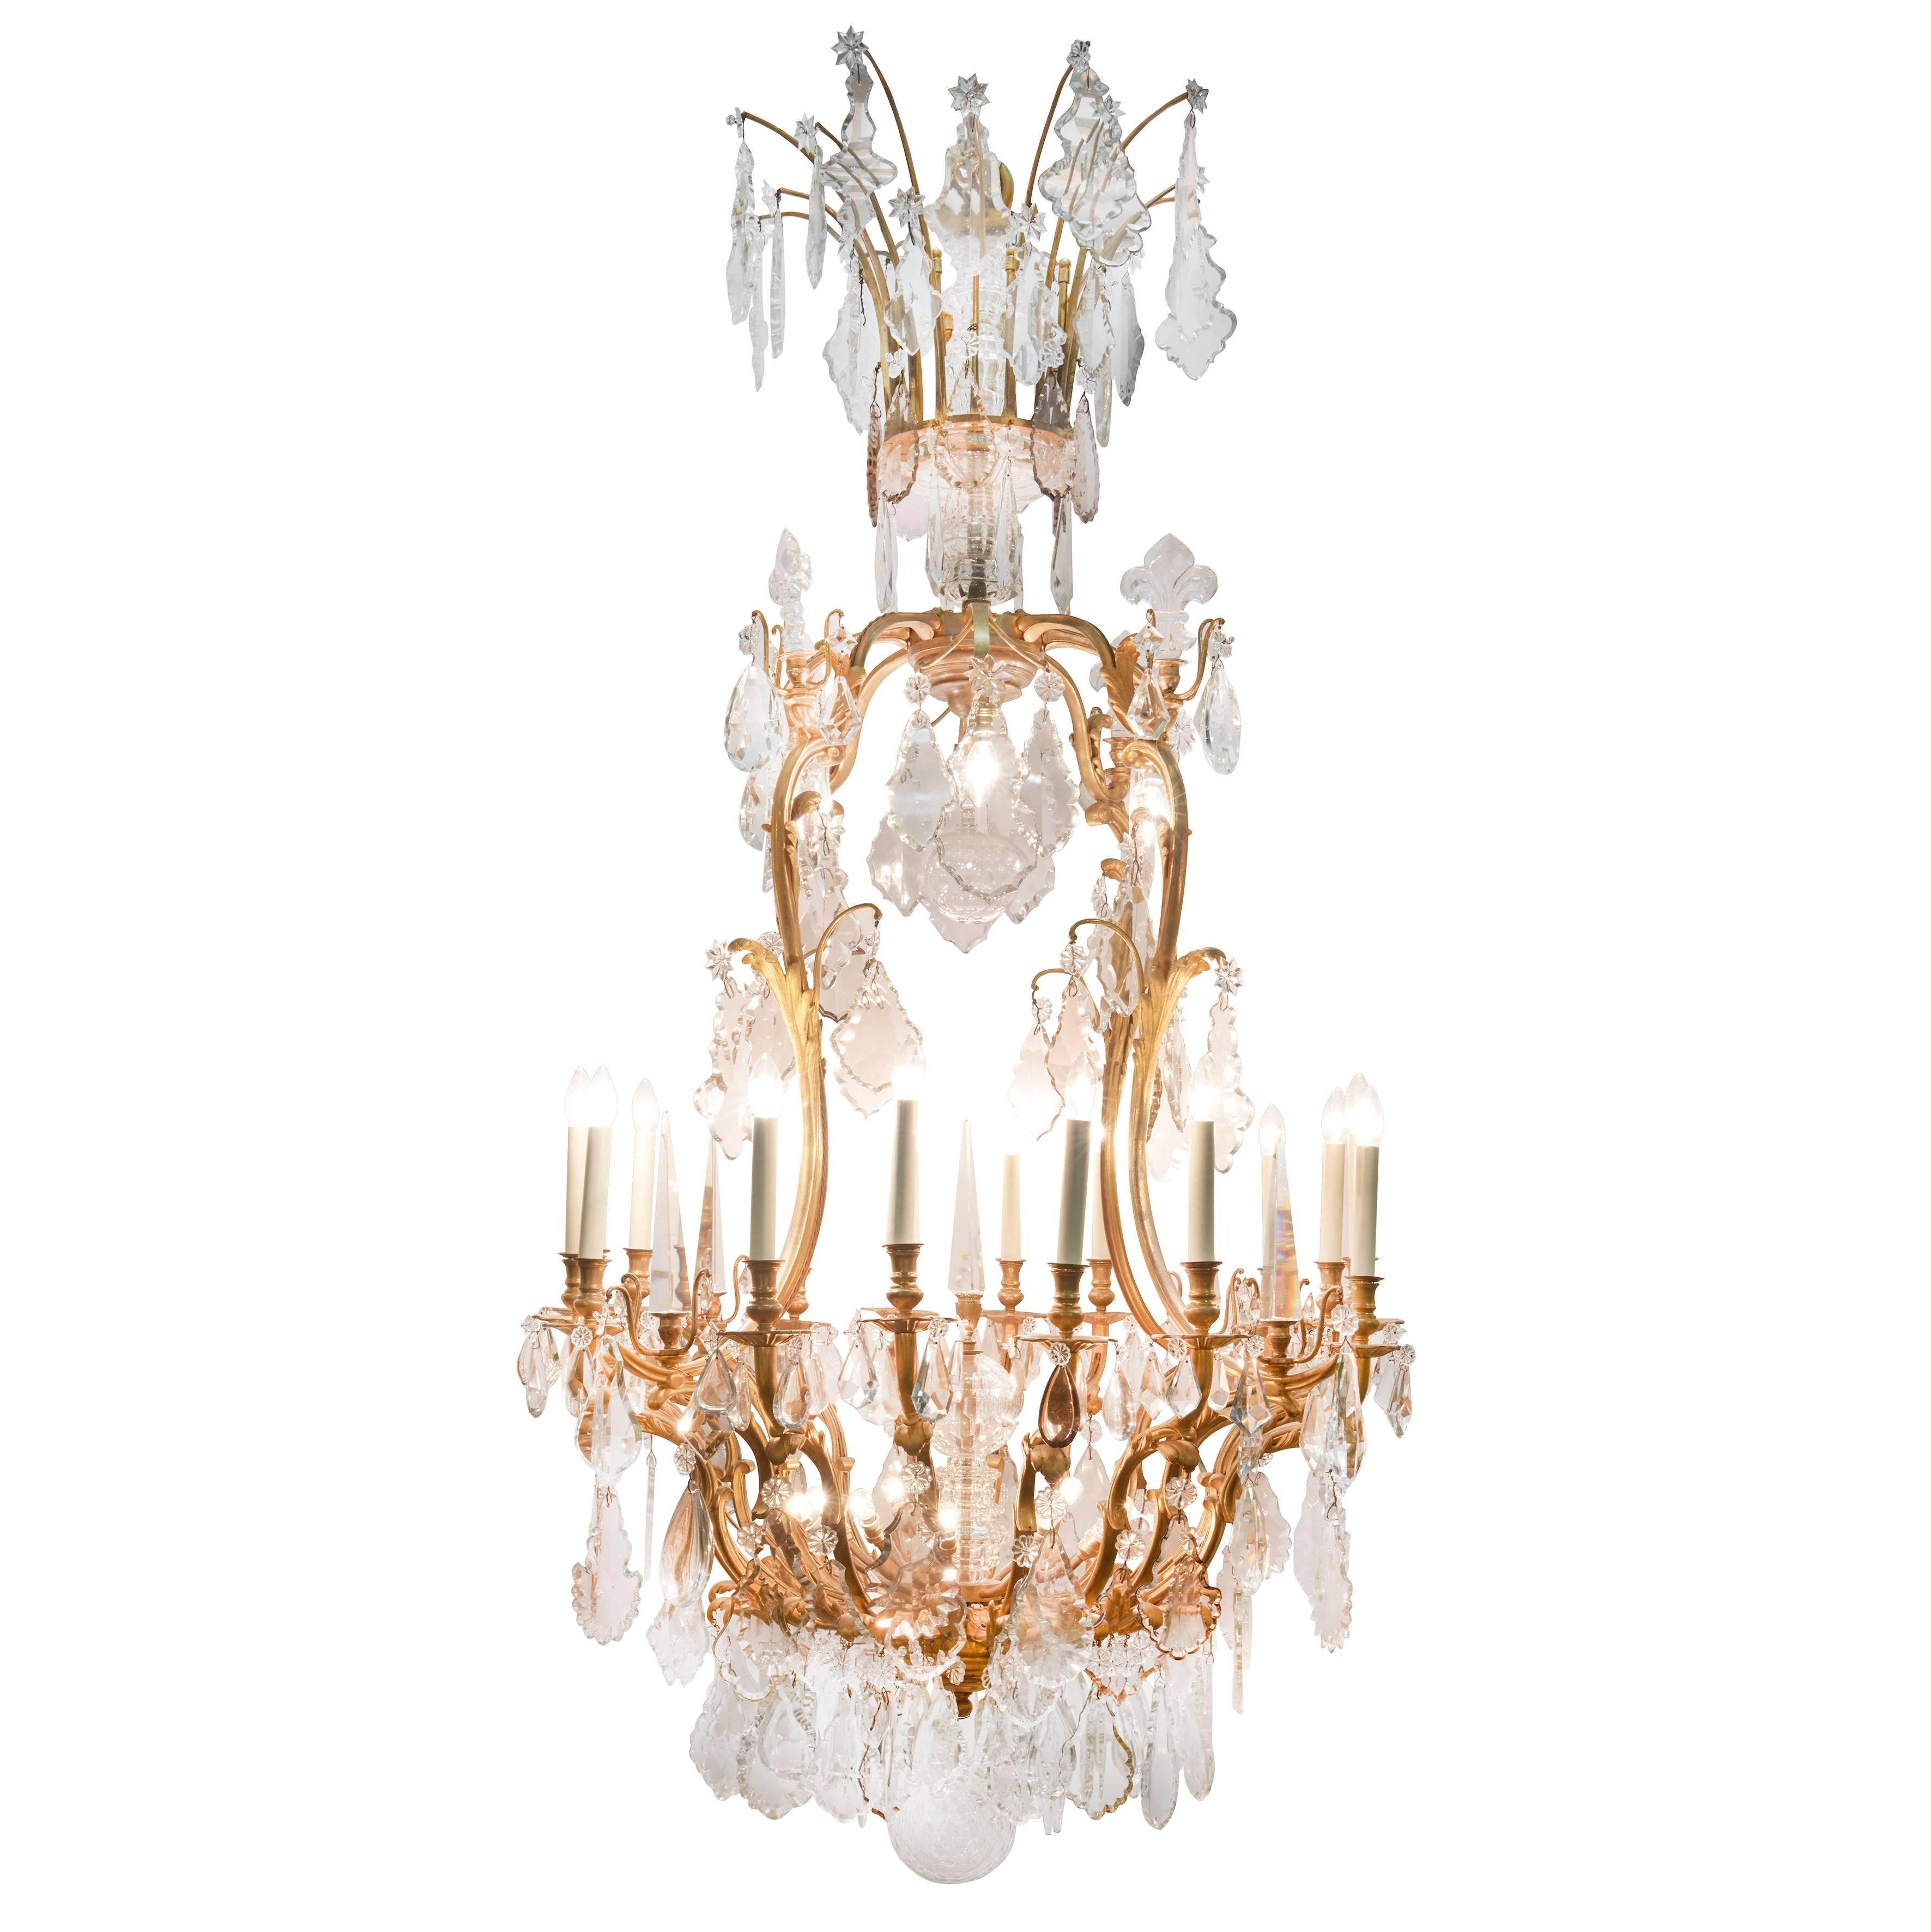 Of cartouche outline, with glass baluster shaft with acanthus scroll branches of light and spires, hung with large cut glass plaques, facetted drops and rosettes, terminated with a facetted glass ball. Professionally wired for